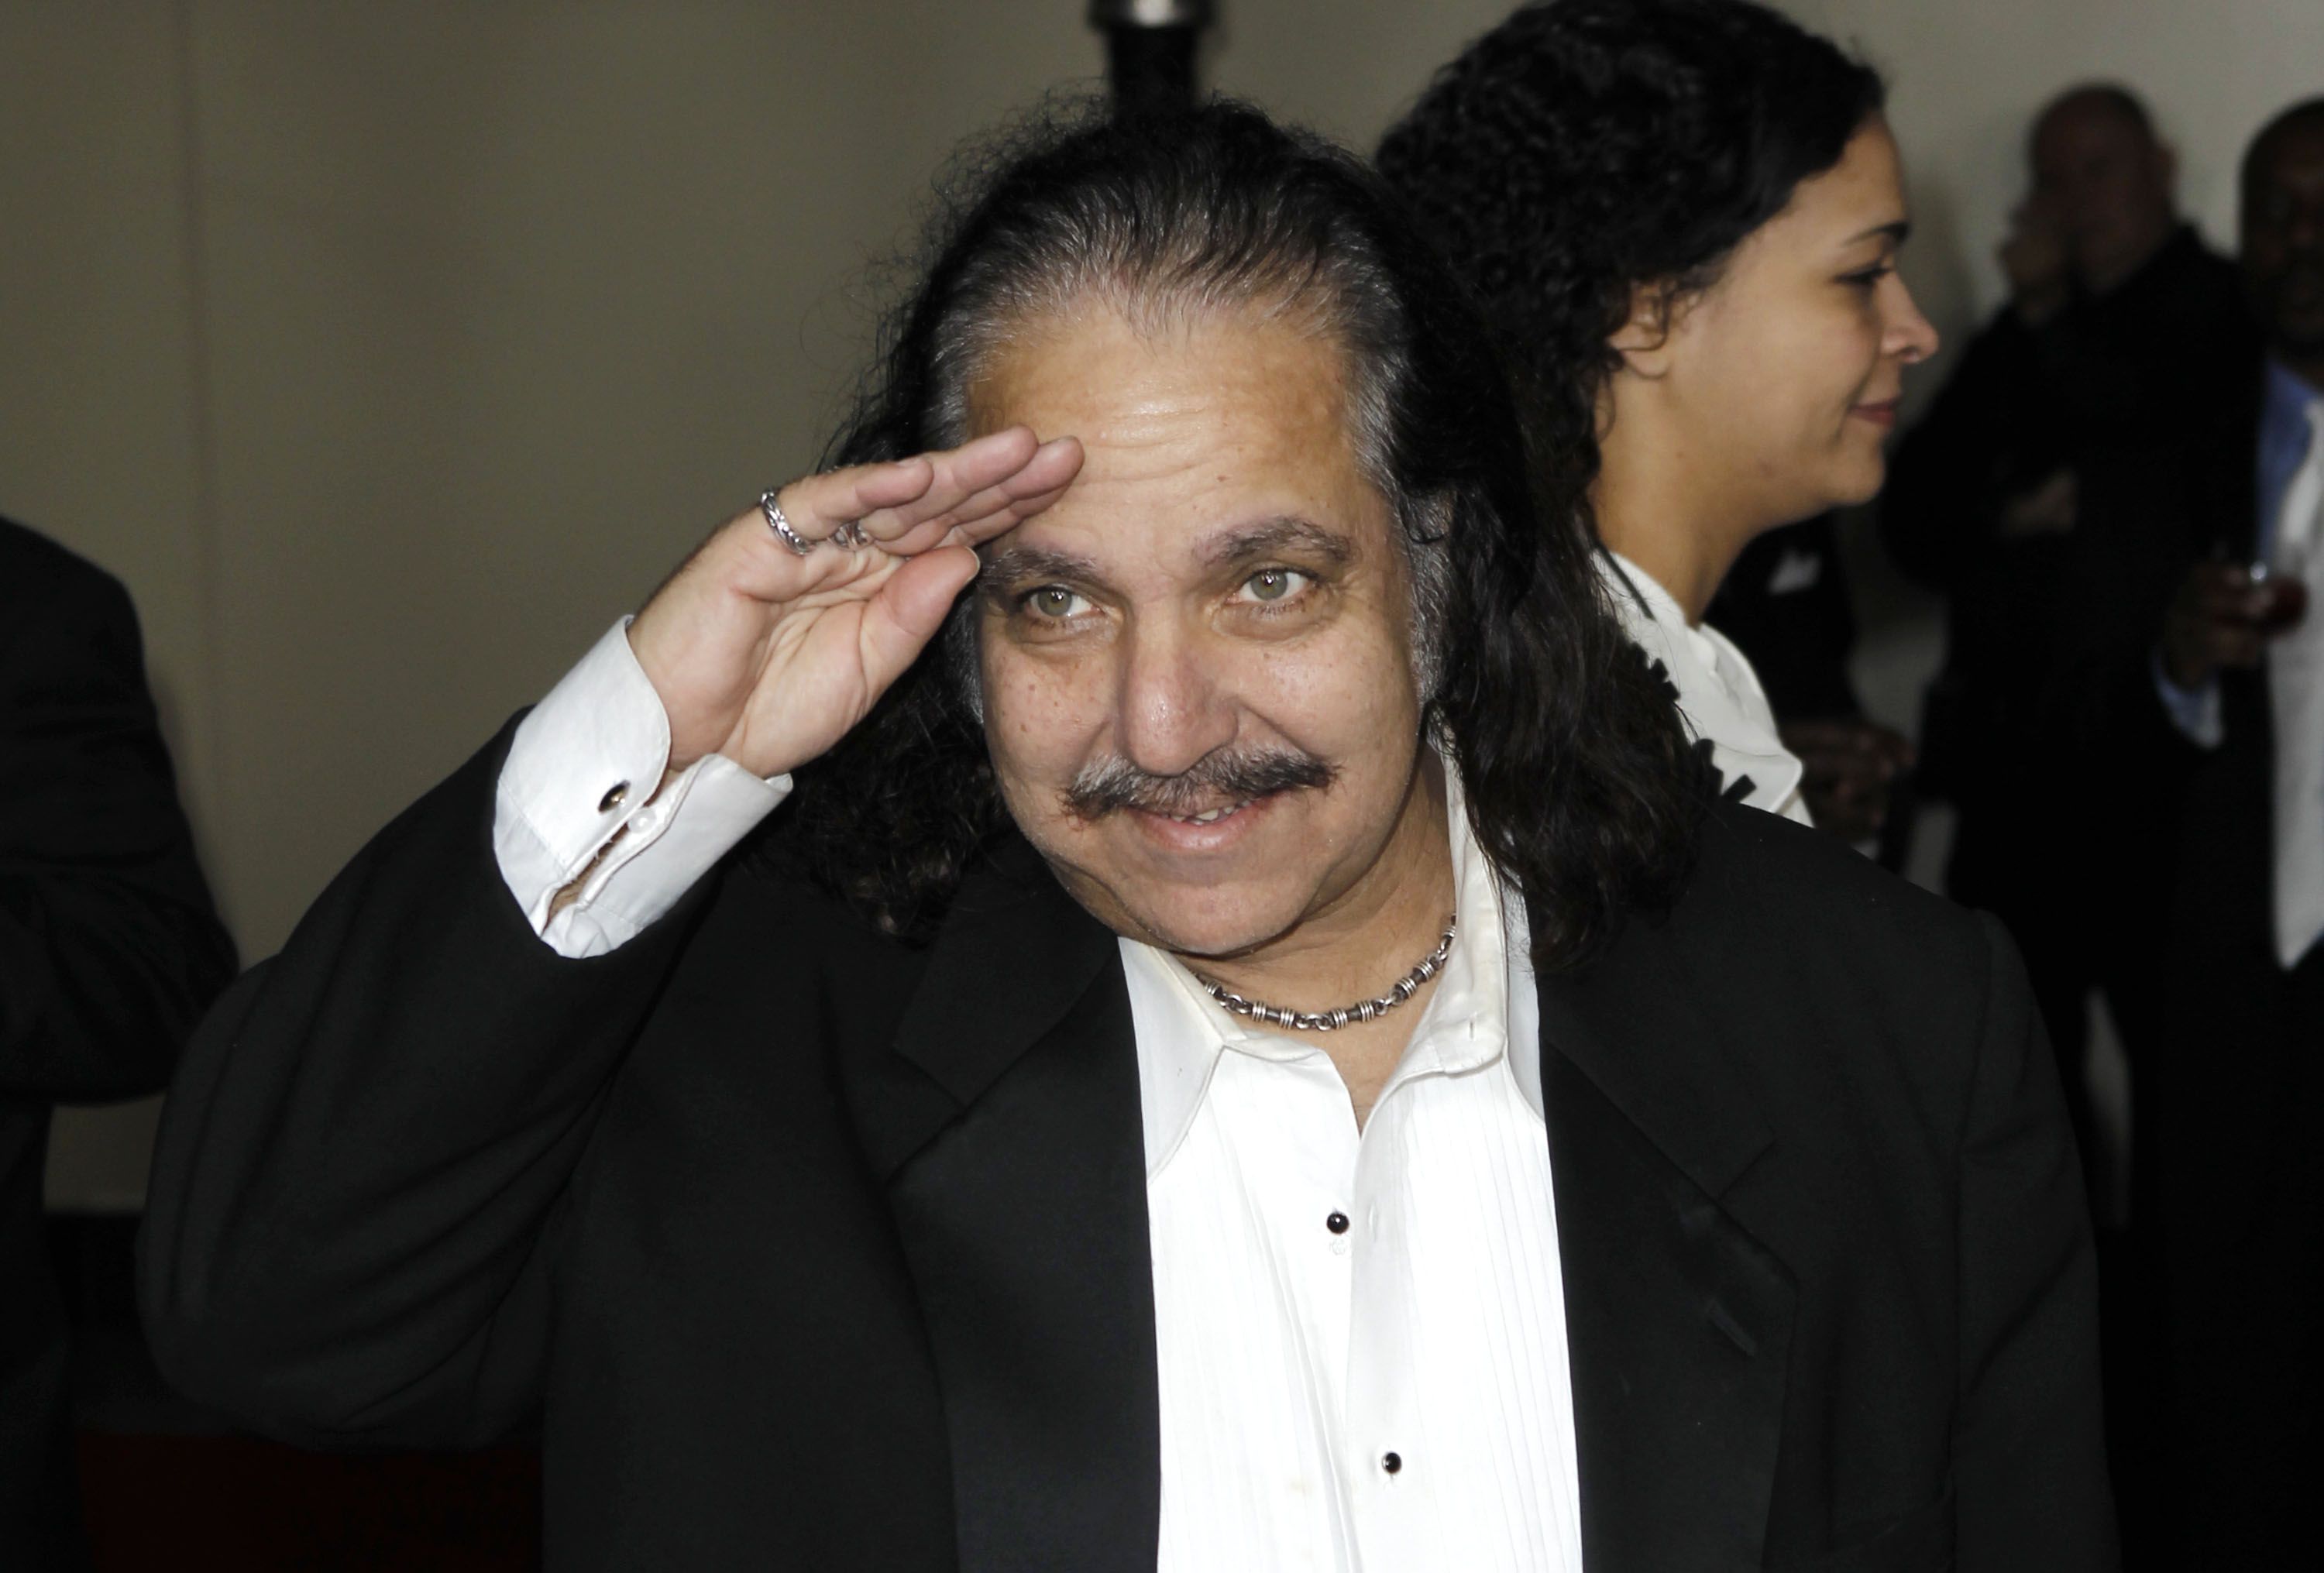 Ron Jeremy in critical condition image pic